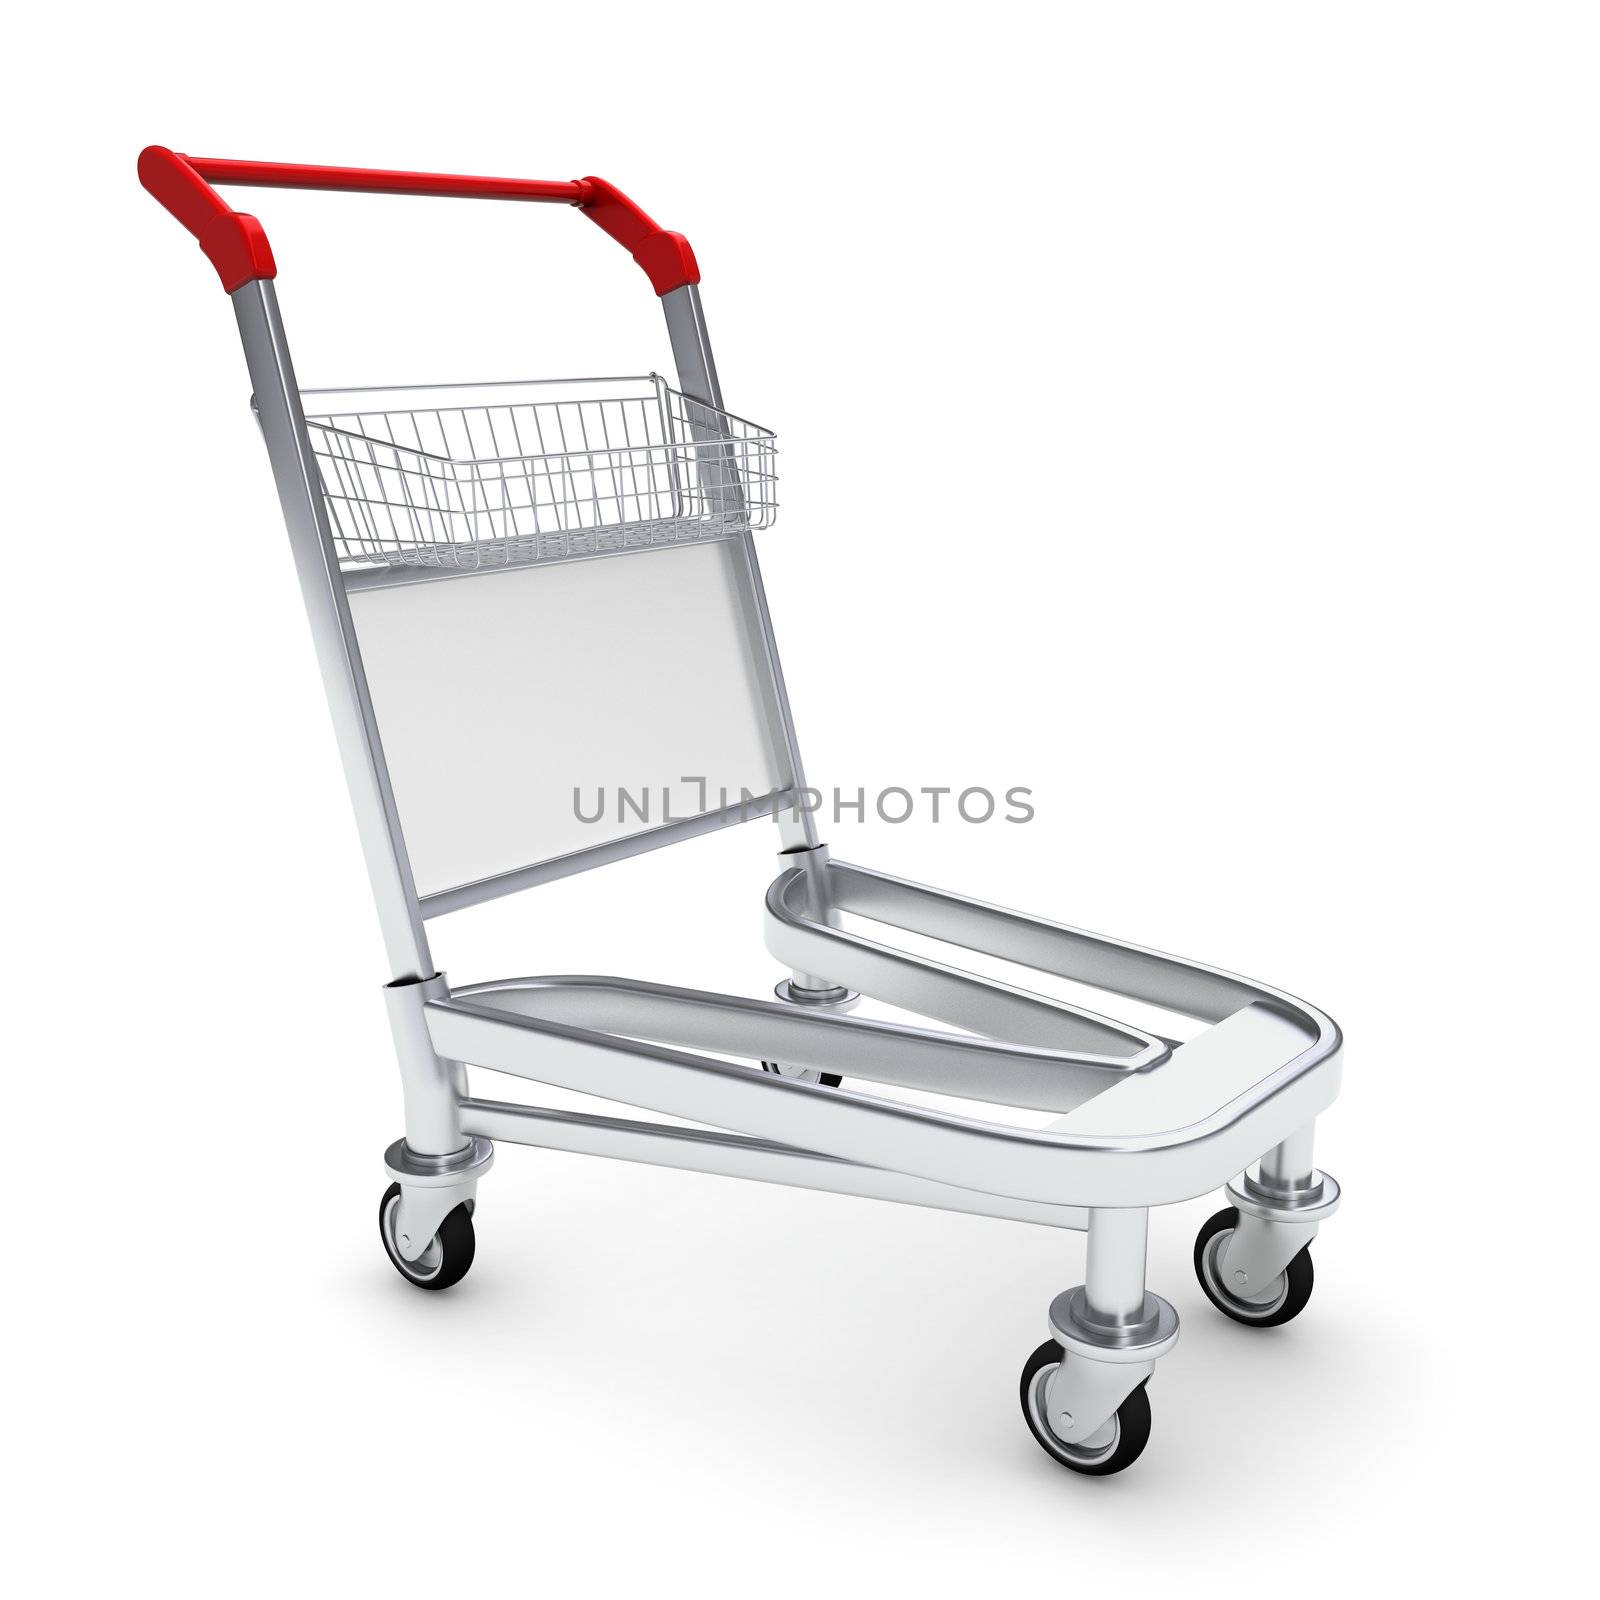 Trolley for luggage at the airport by cherezoff